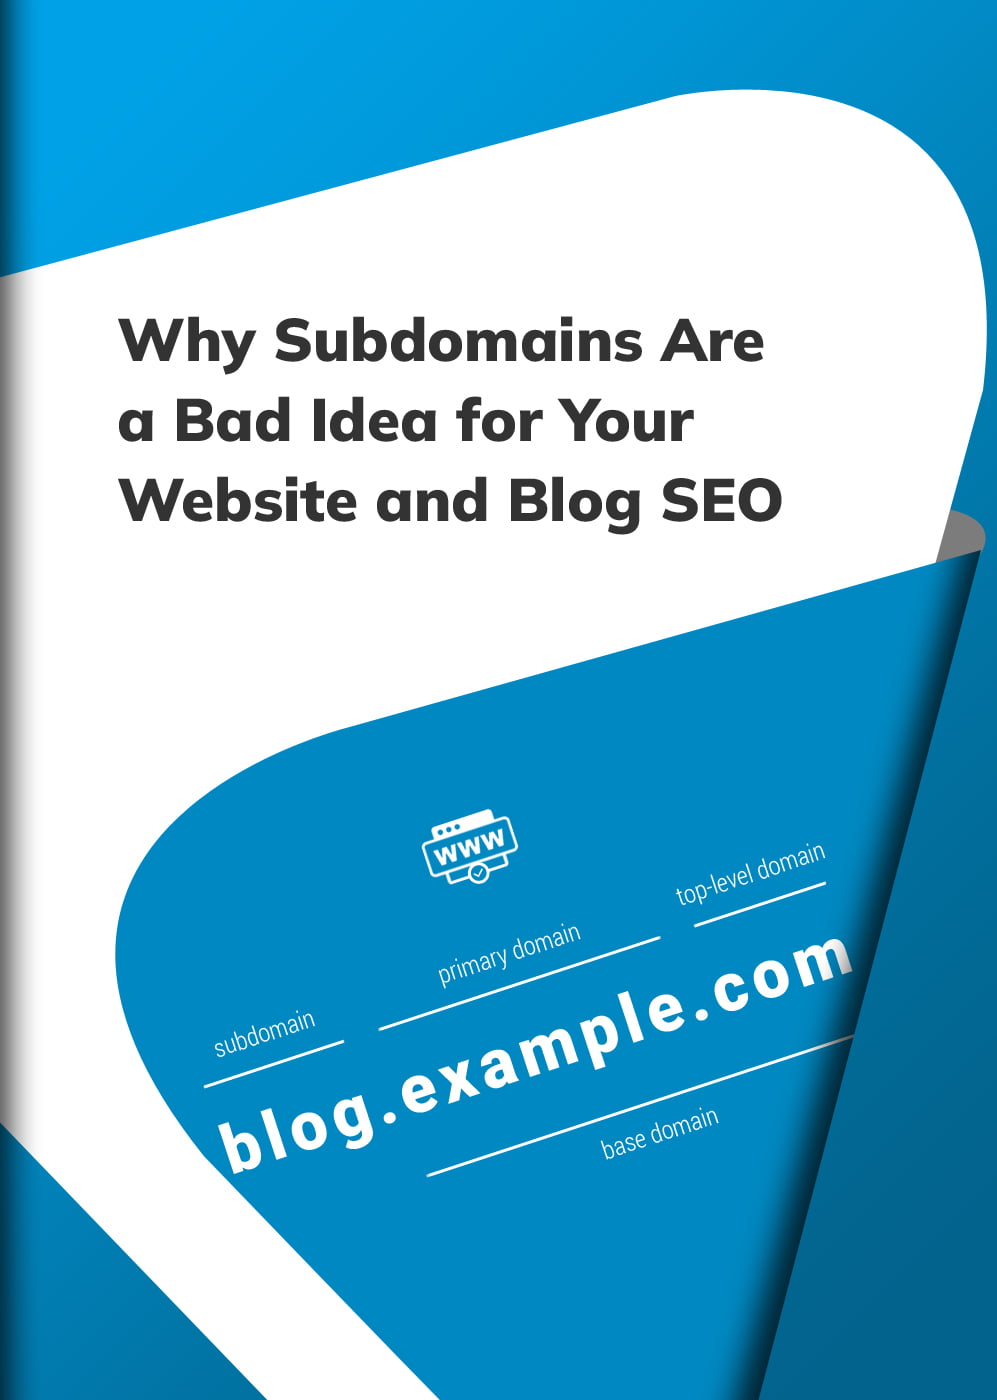 Why-Subdomains-Are-a-Bad-Idea-for-Your-Website-and-Blog-SEO